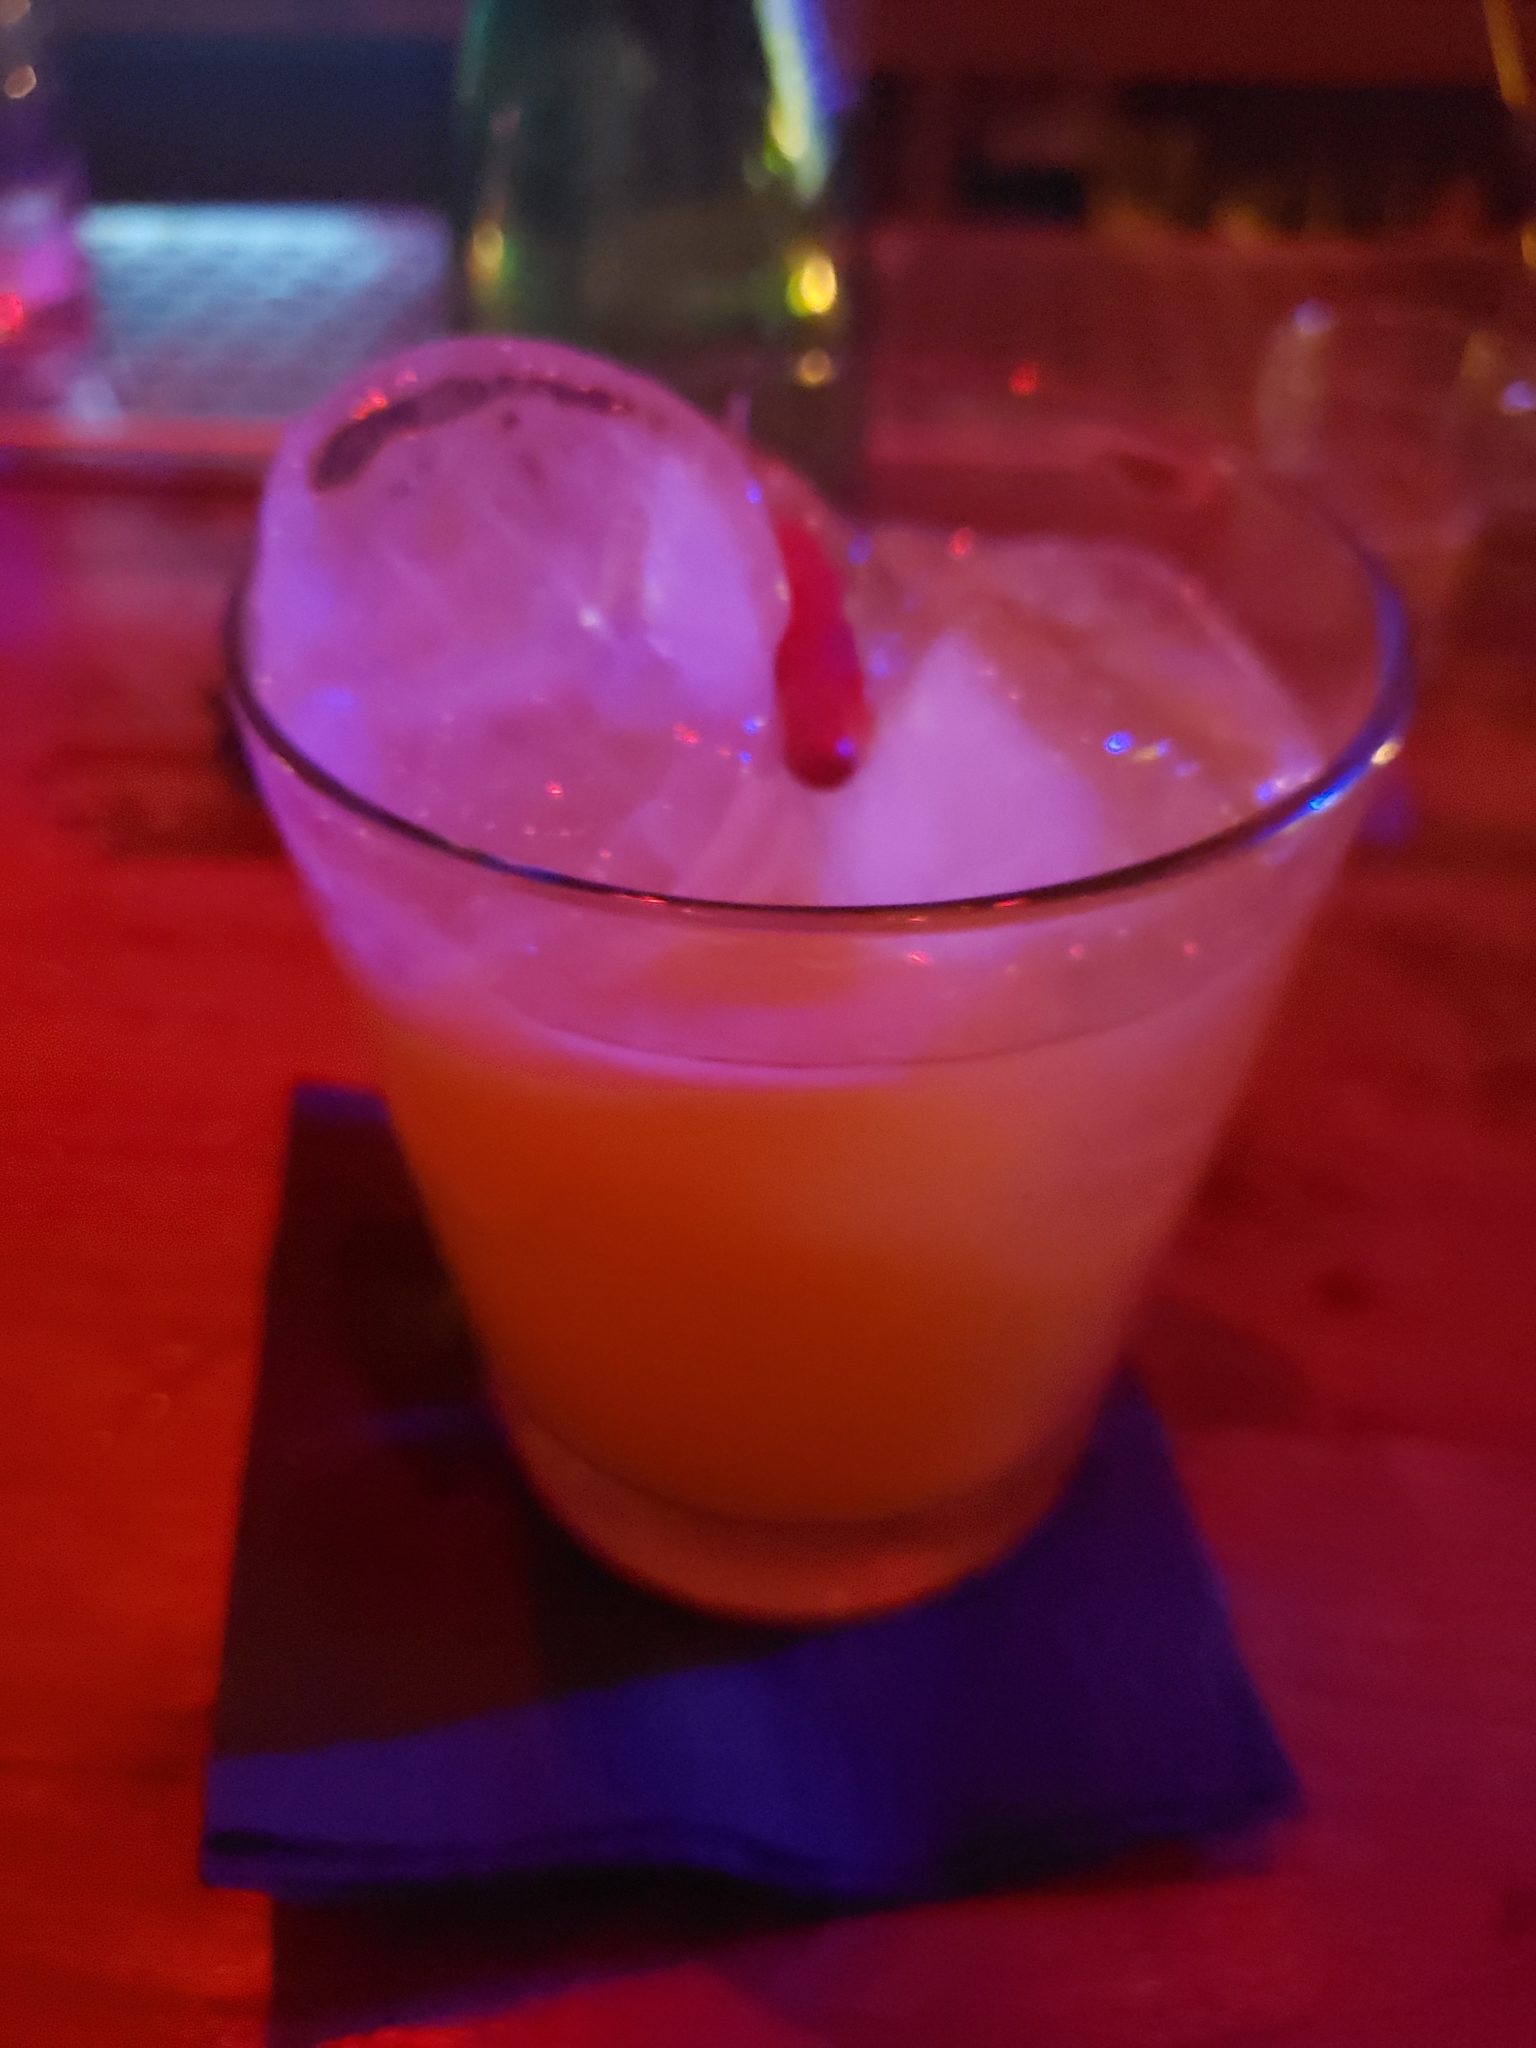 a glass of orange liquid with a straw in it